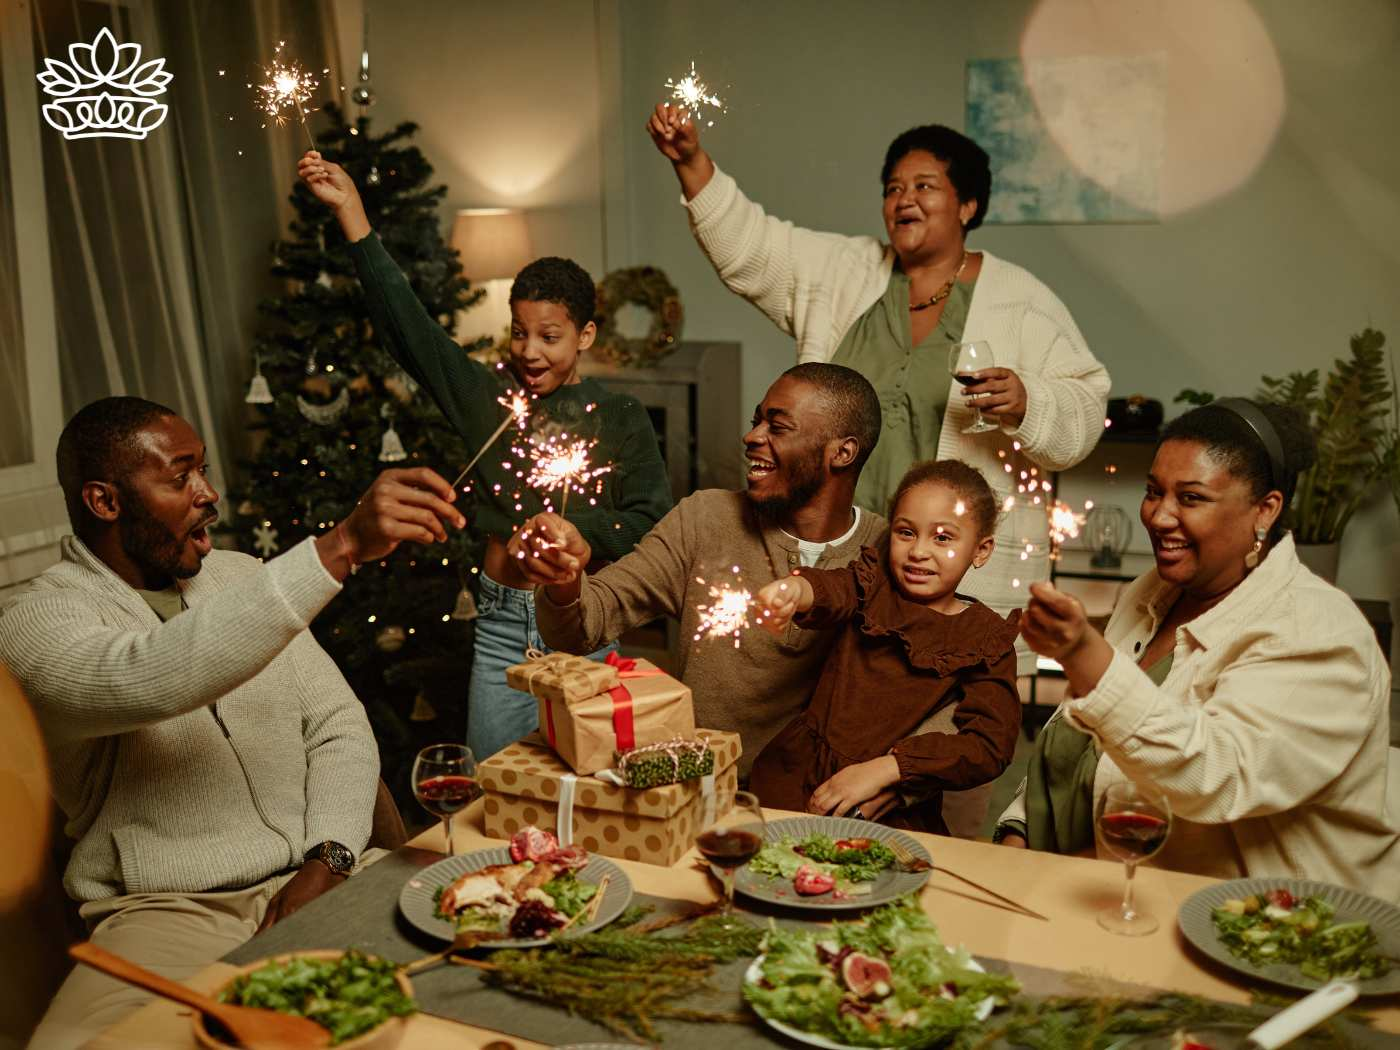 Joyful family celebrating Christmas with sparklers around a festive dinner table, part of the Festive Season Collection delivered with heart by Fabulous Flowers and Gifts.